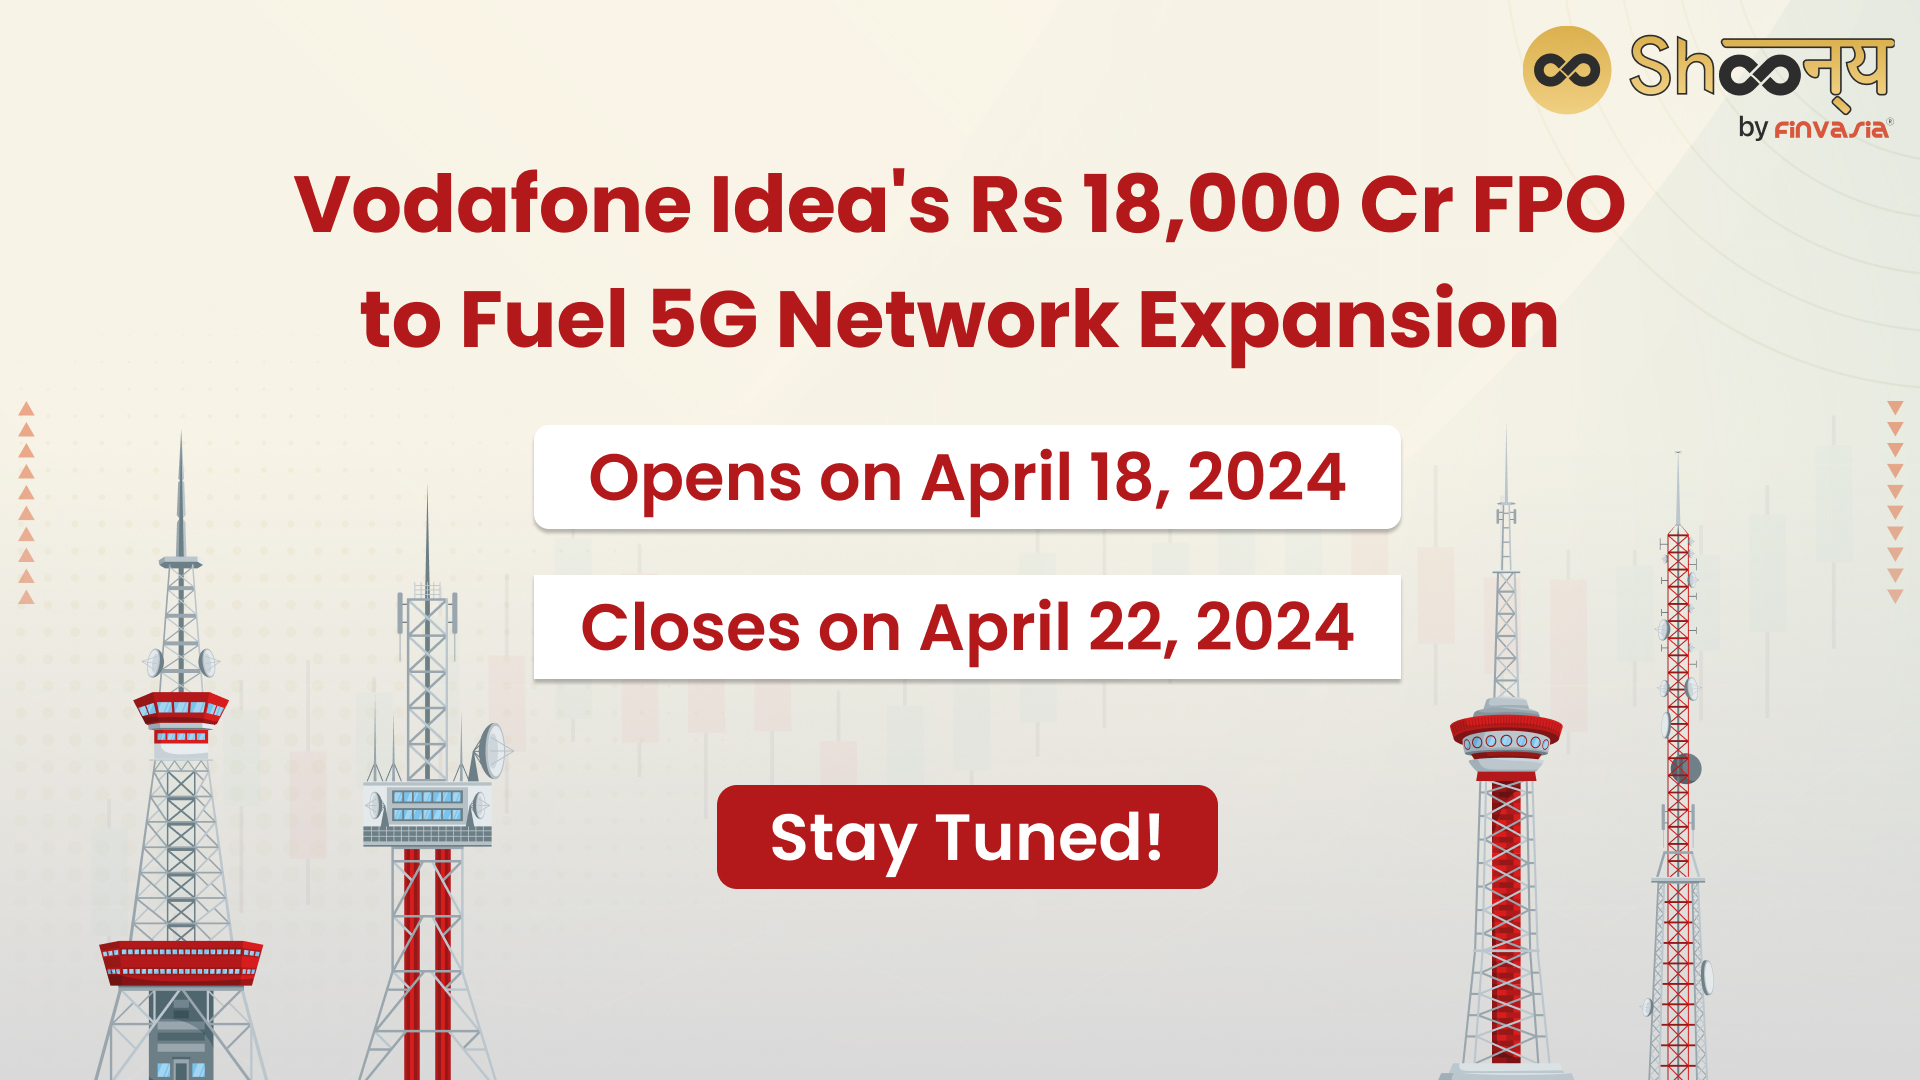 Insights into Vodafone Idea's FPO Valued at Rs 18,000 Cr